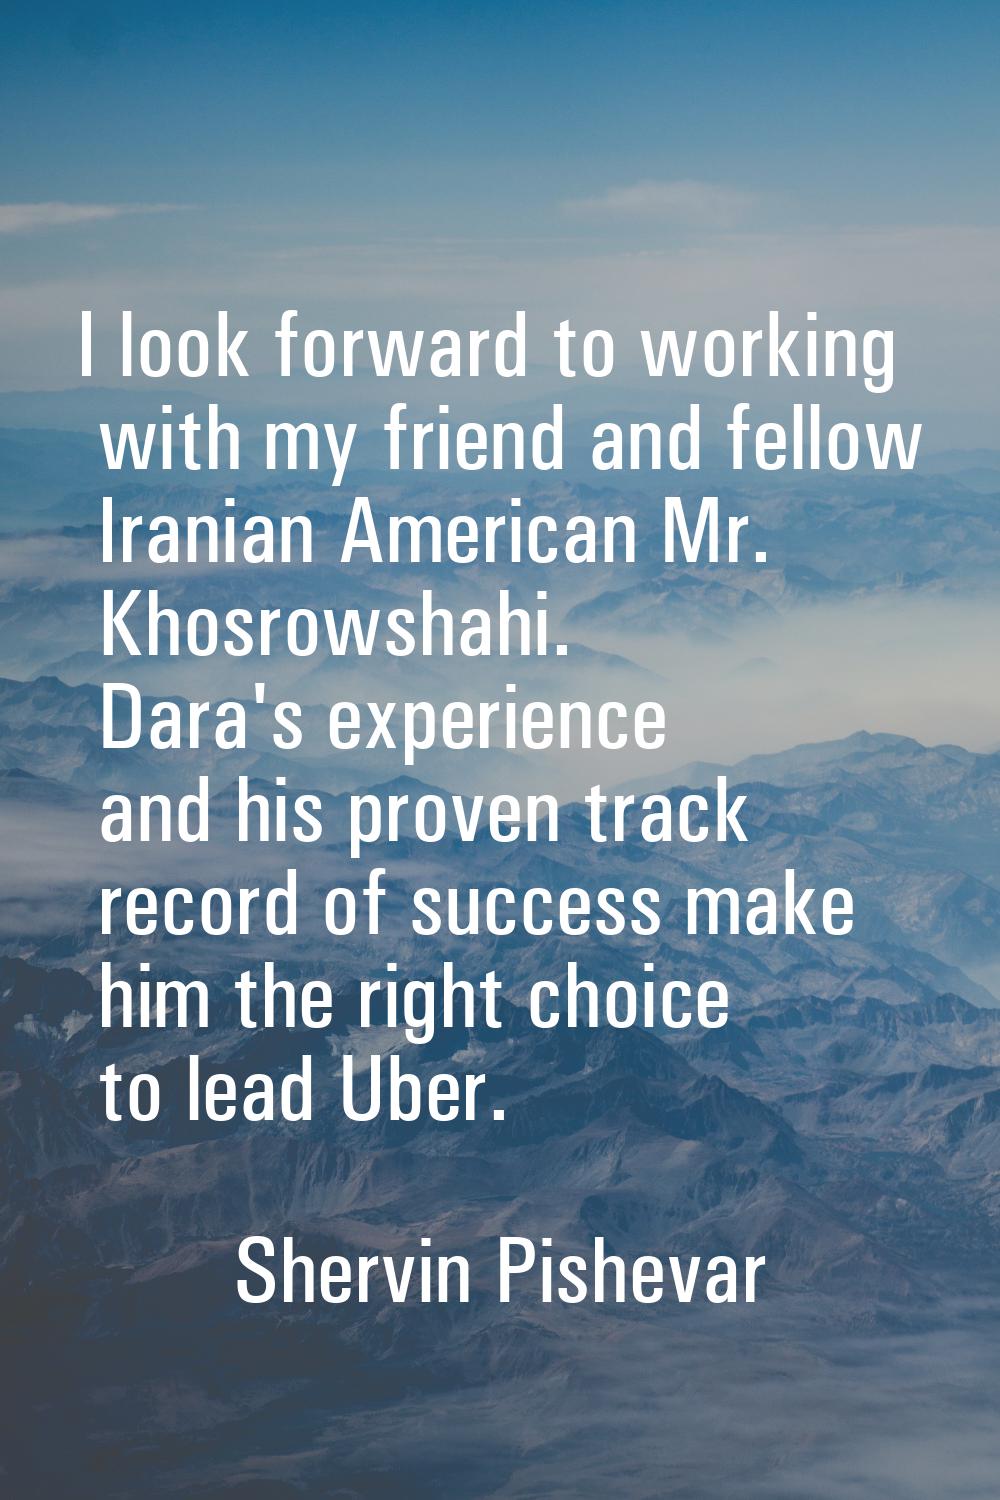 I look forward to working with my friend and fellow Iranian American Mr. Khosrowshahi. Dara's exper